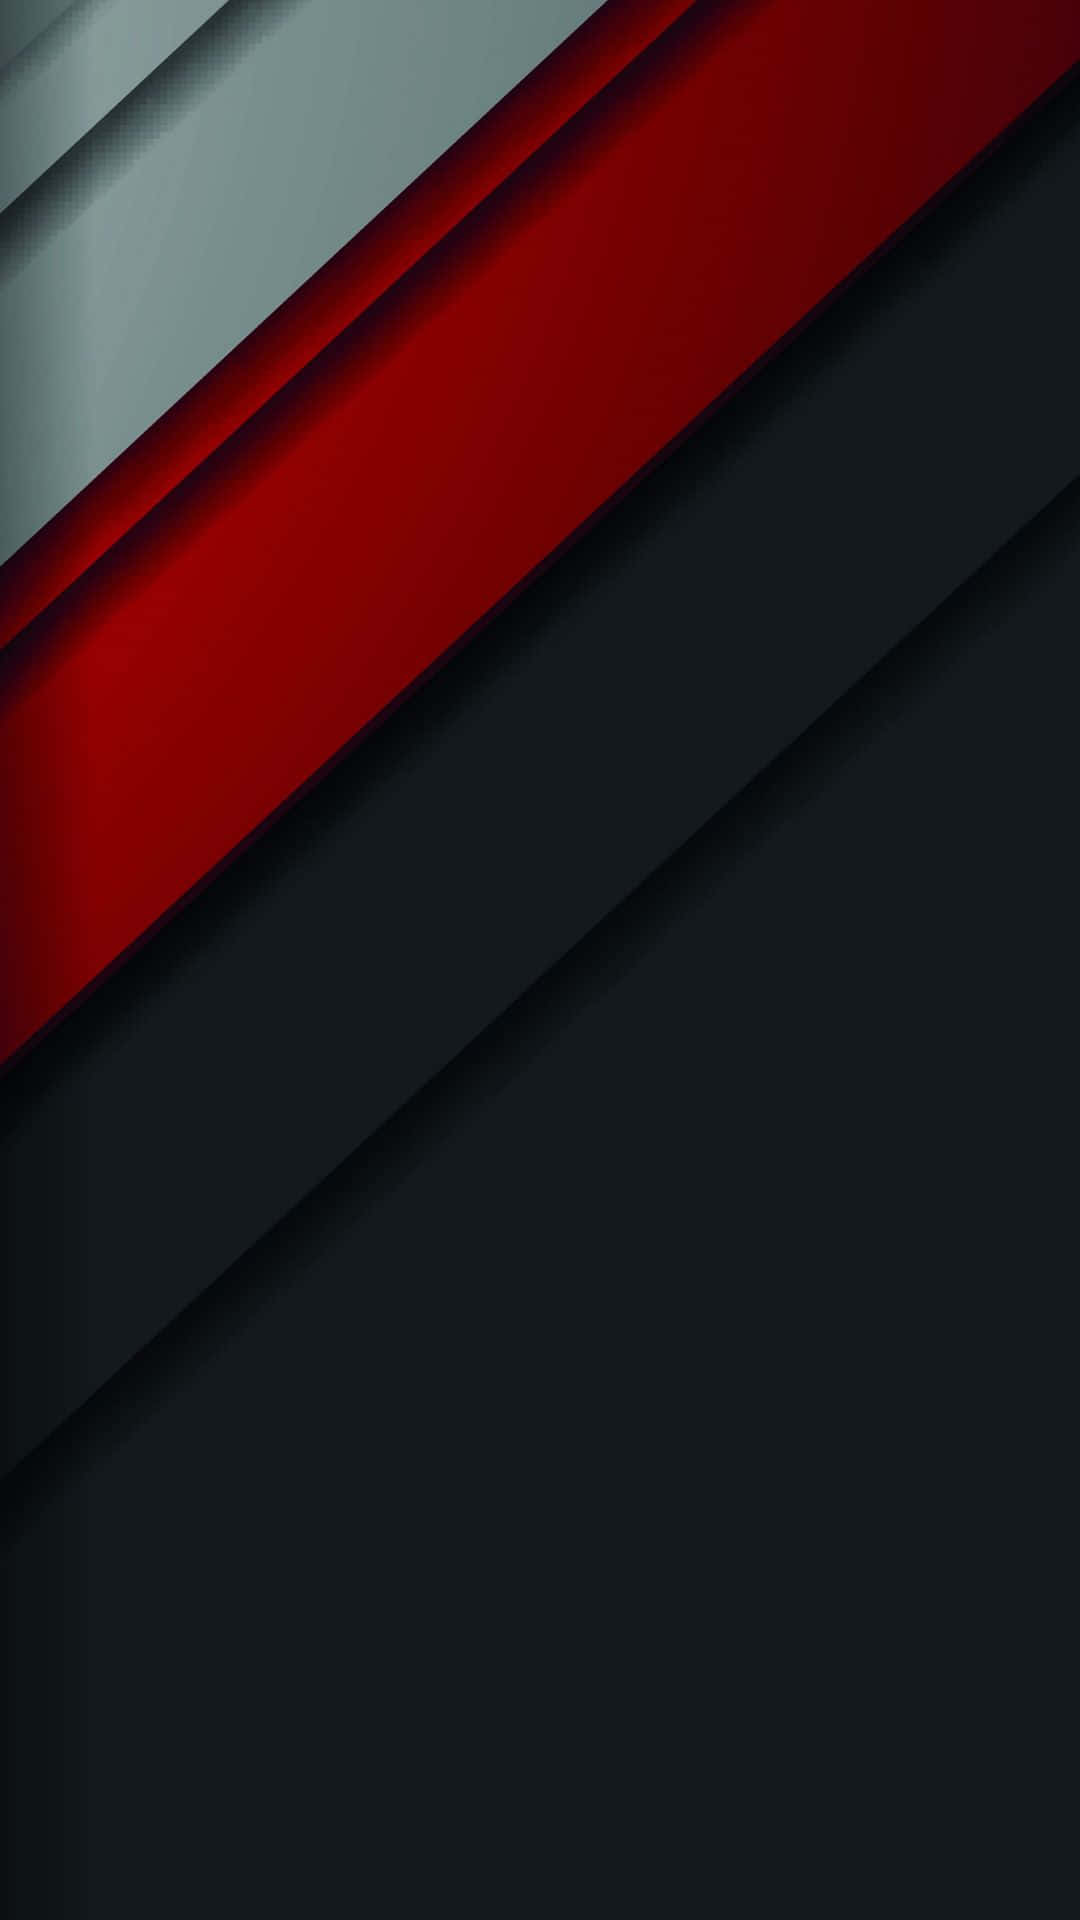 A Red And Black Background With A Red And Black Stripe Wallpaper